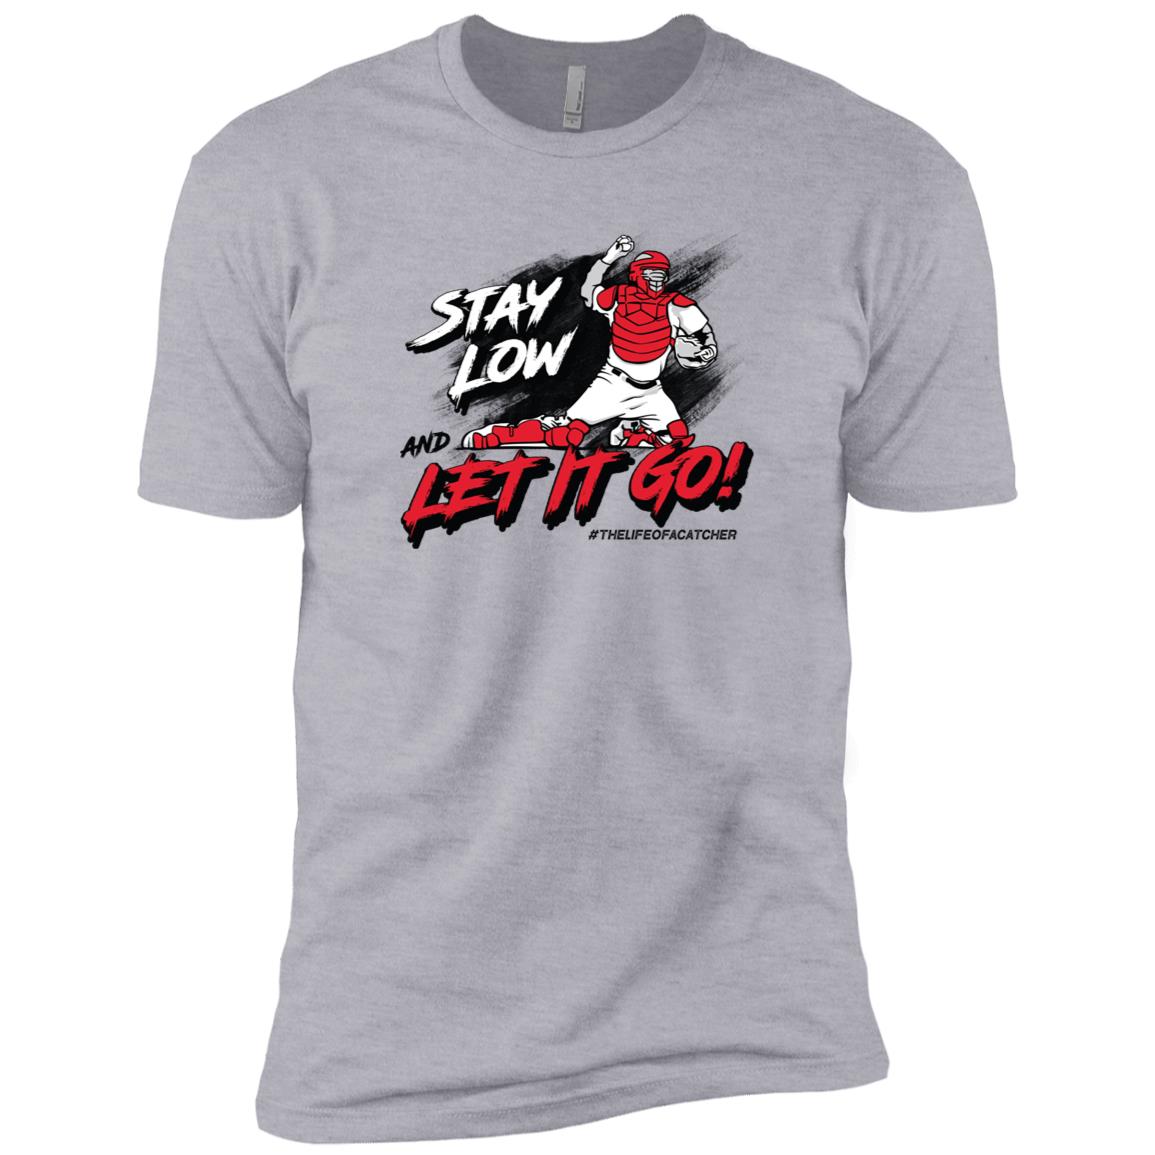 Stay Low & Let It Go Youth Short Sleeve Tee - Grey